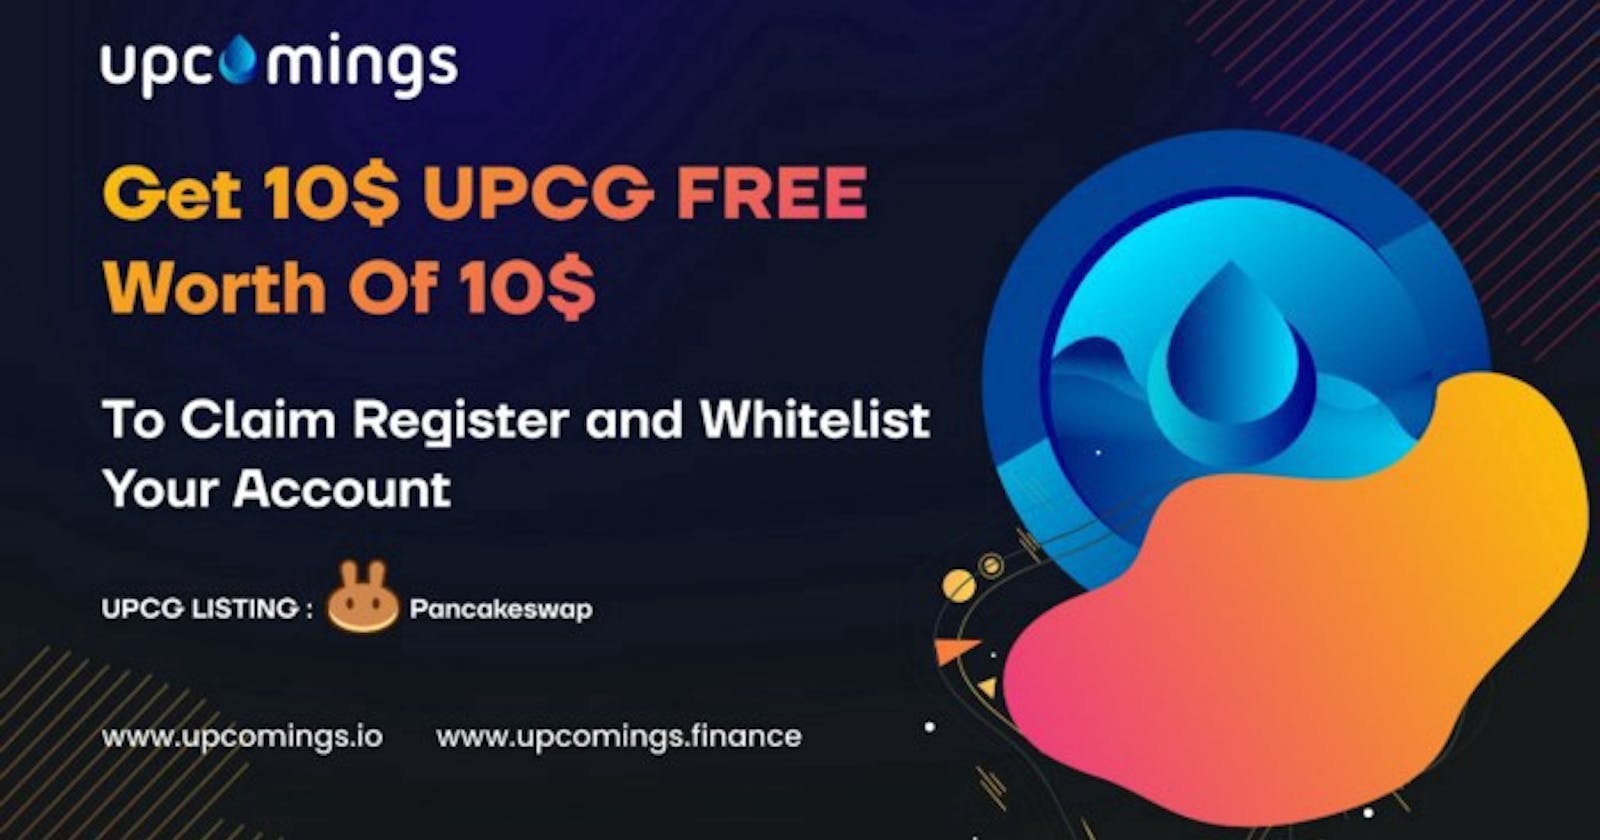 UpcomingsDAO Airdrop is the talk of the town!